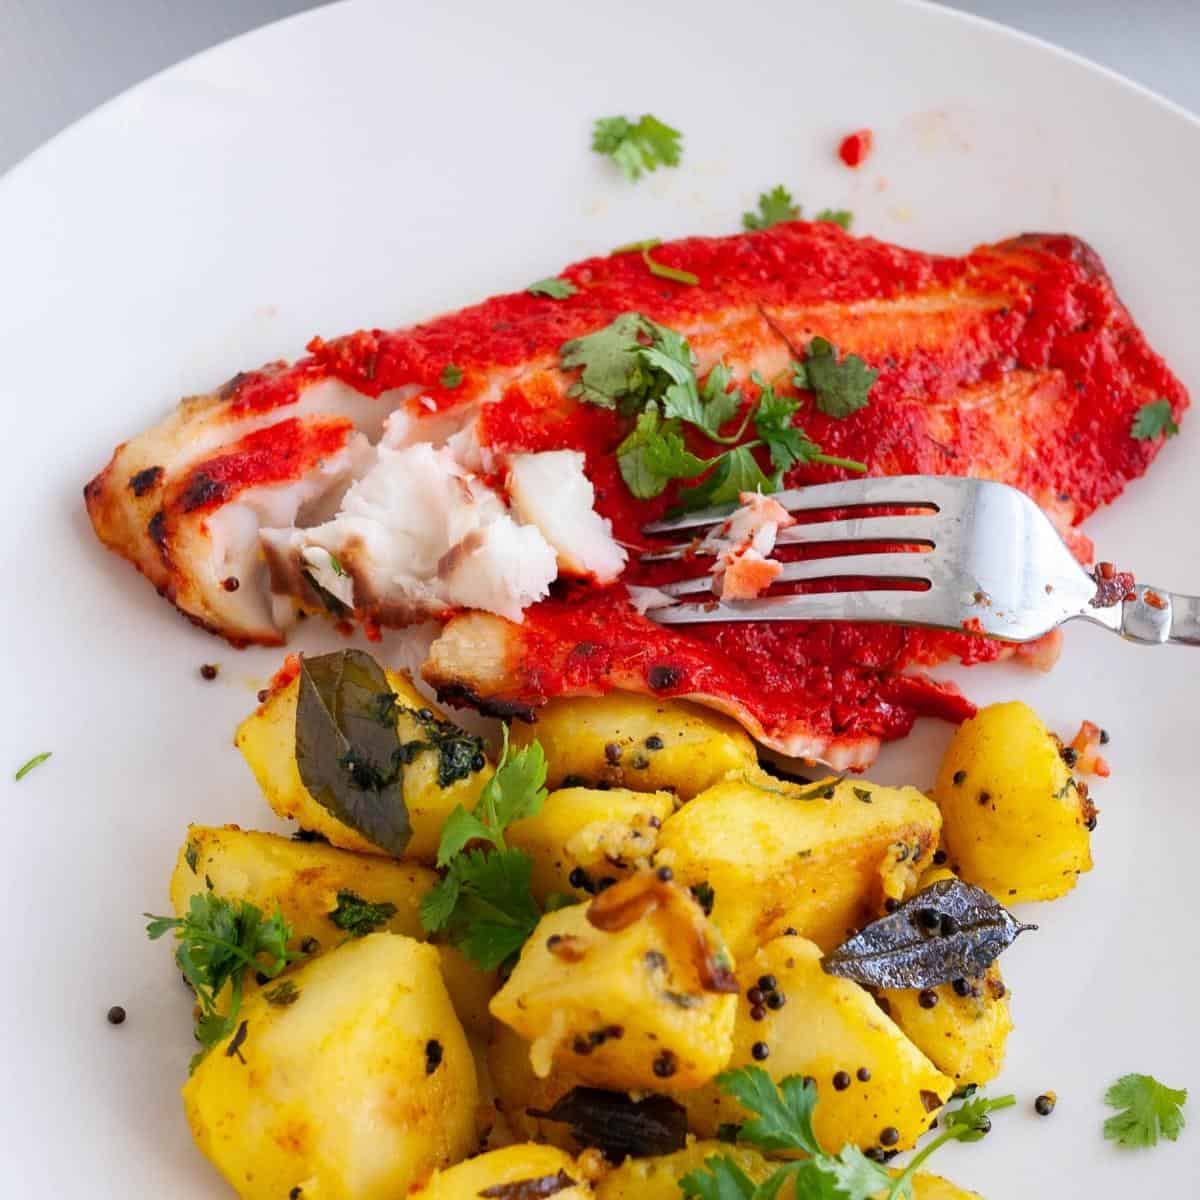 A plate with baked fish in tandoori masala.